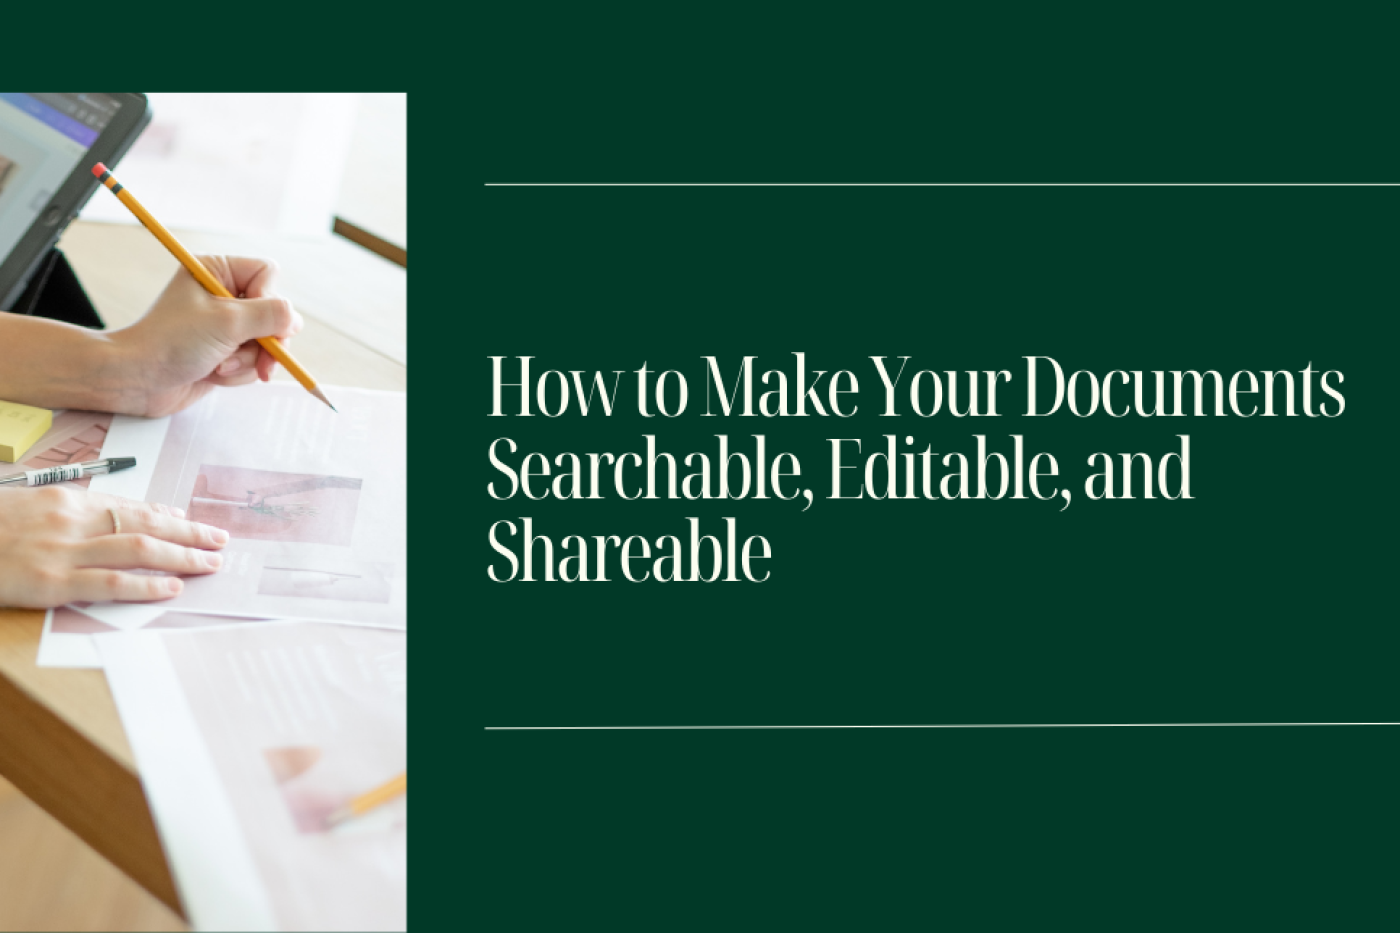 The Potential of OCR Making Your Documents Editable and Shareable